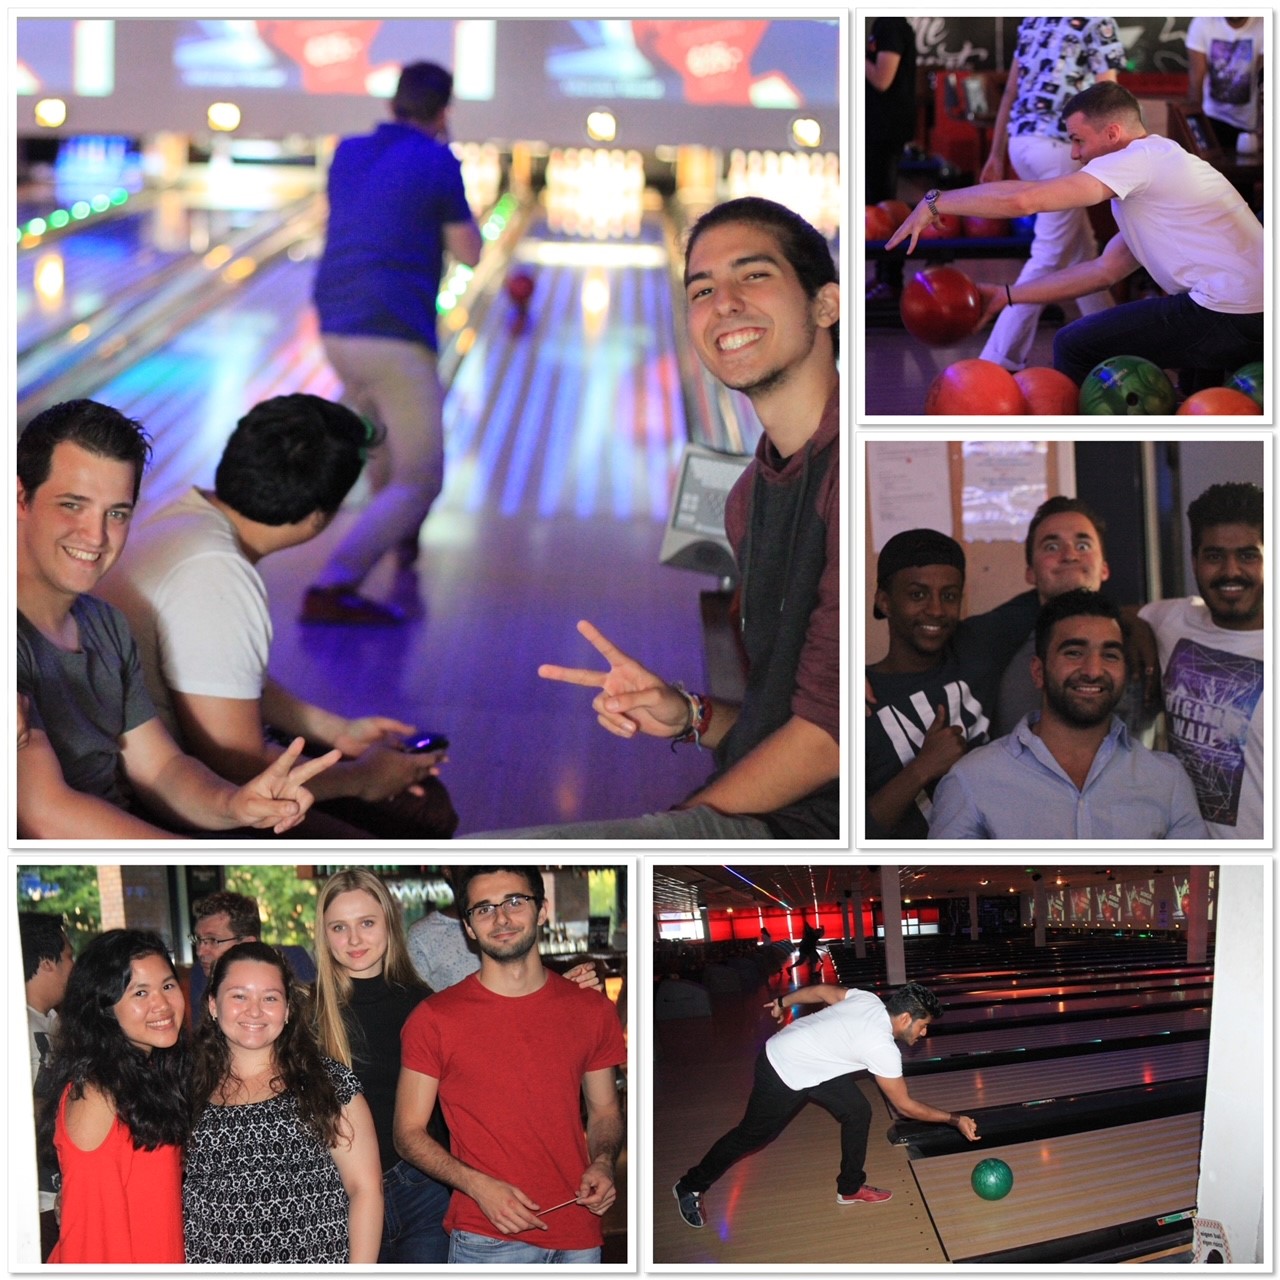 Several pictures of student association bowling activity